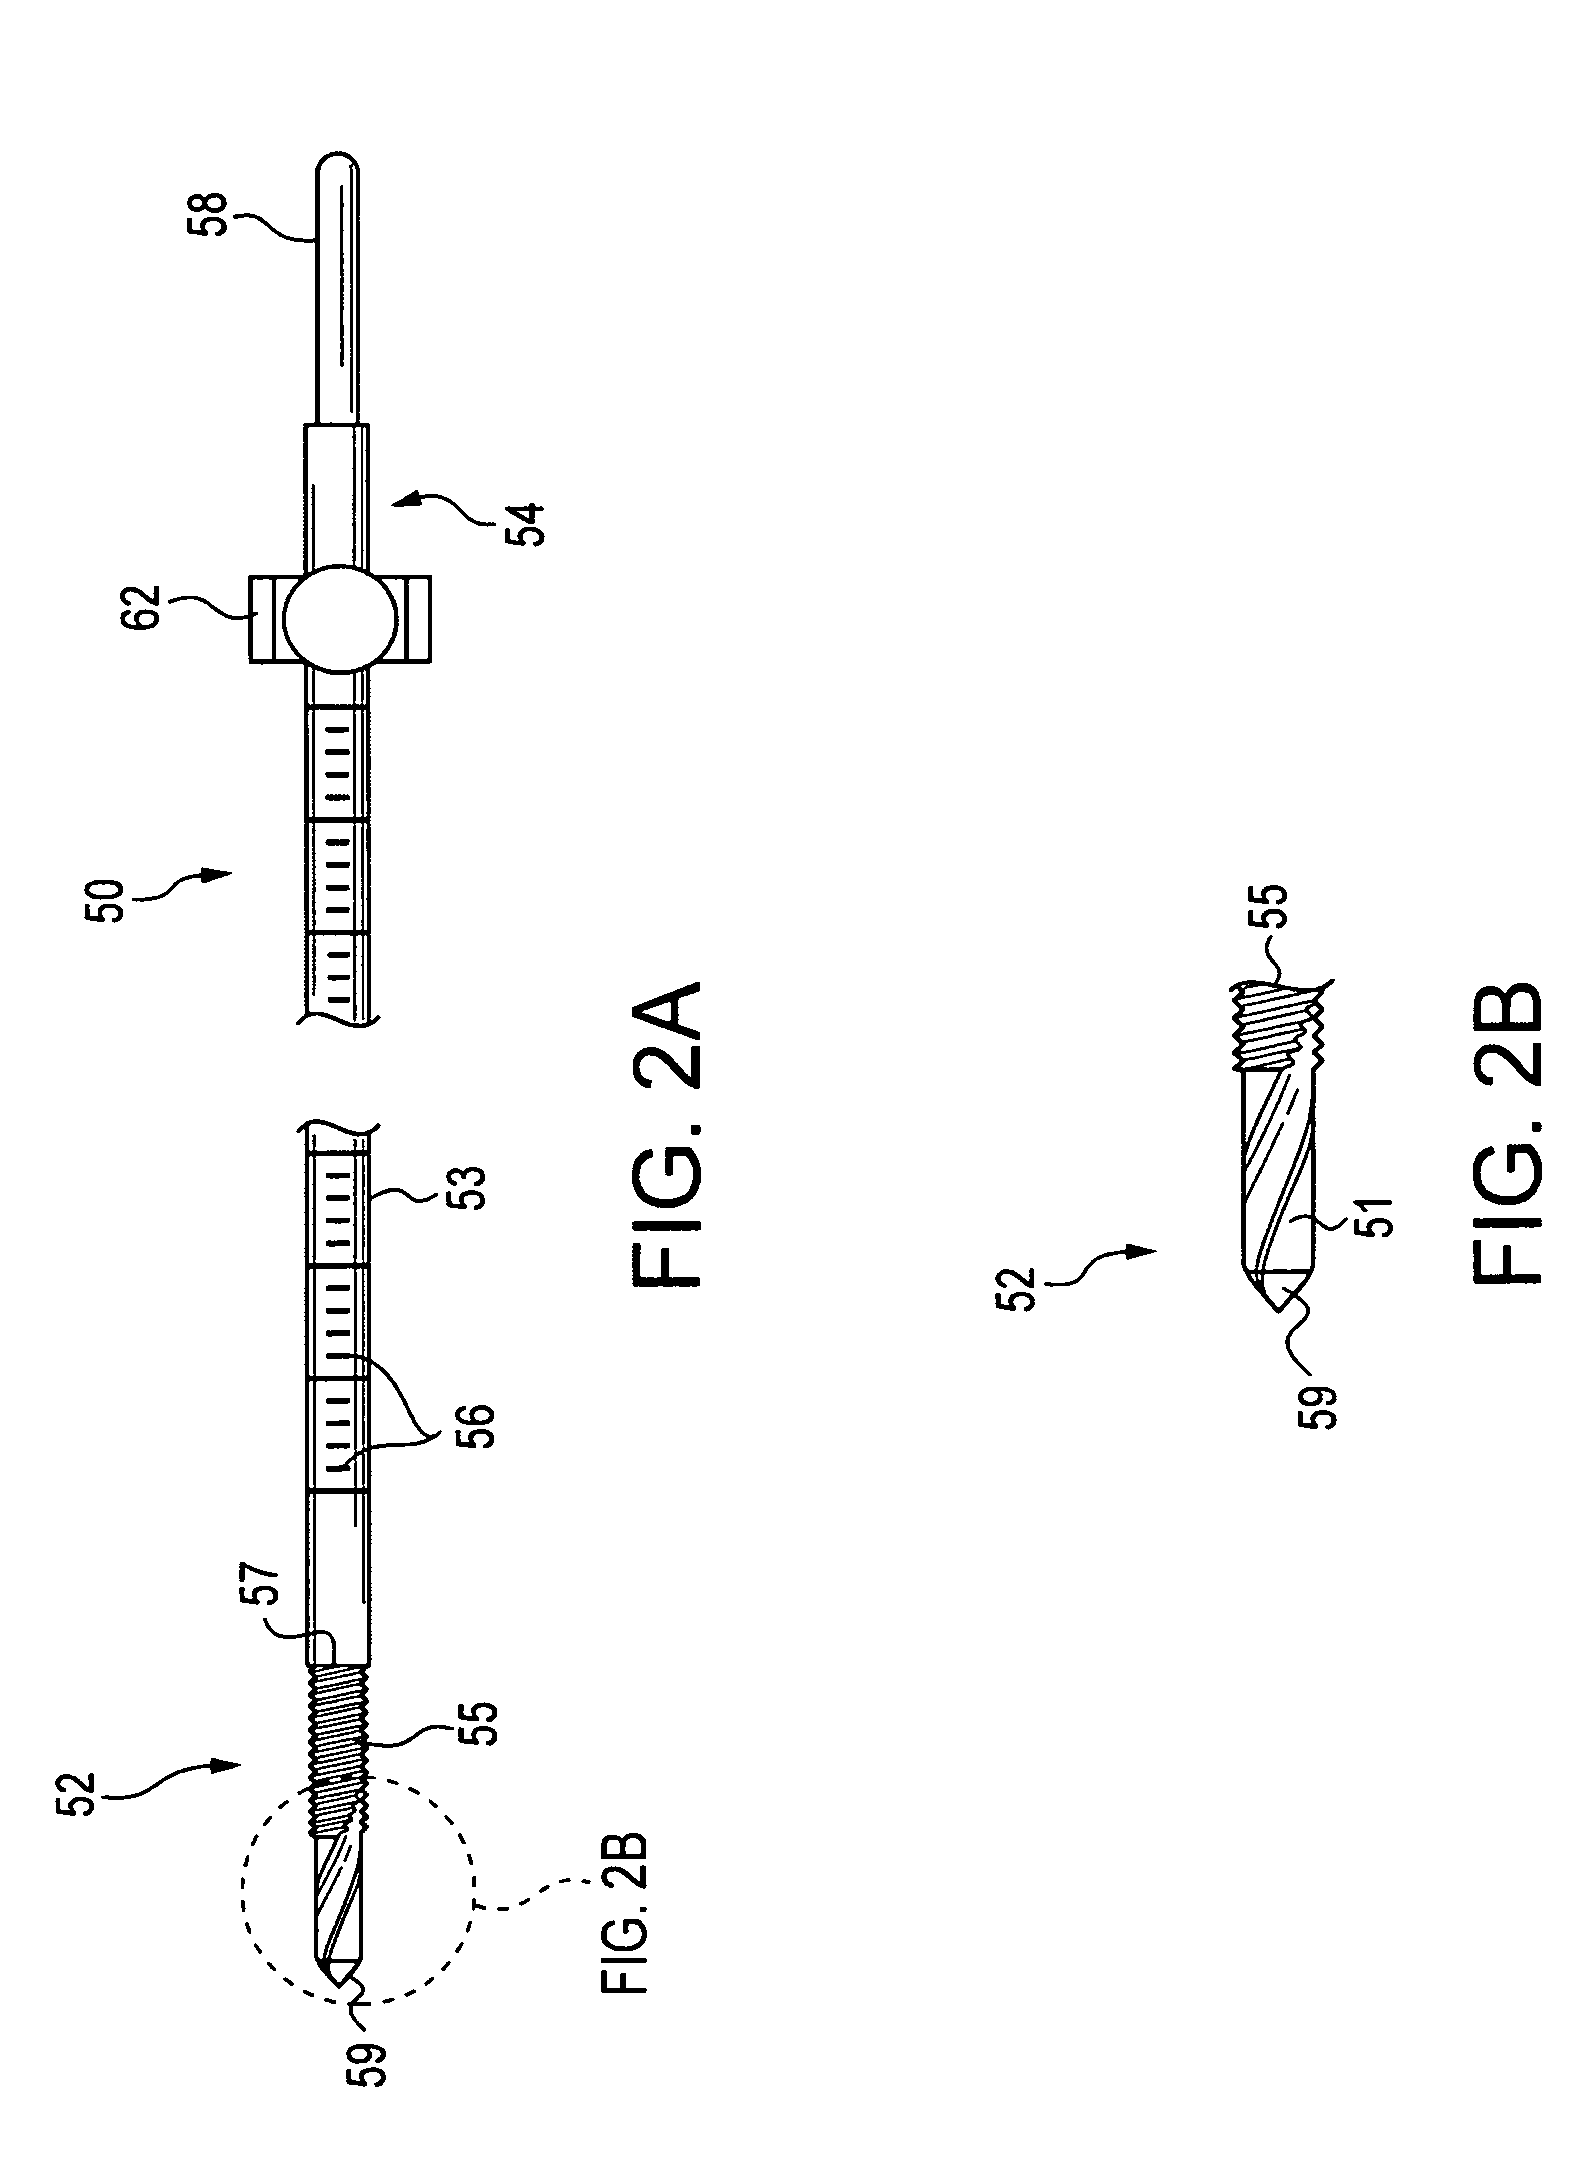 Method and apparatus for ACL reconstruction using retrograde cutter